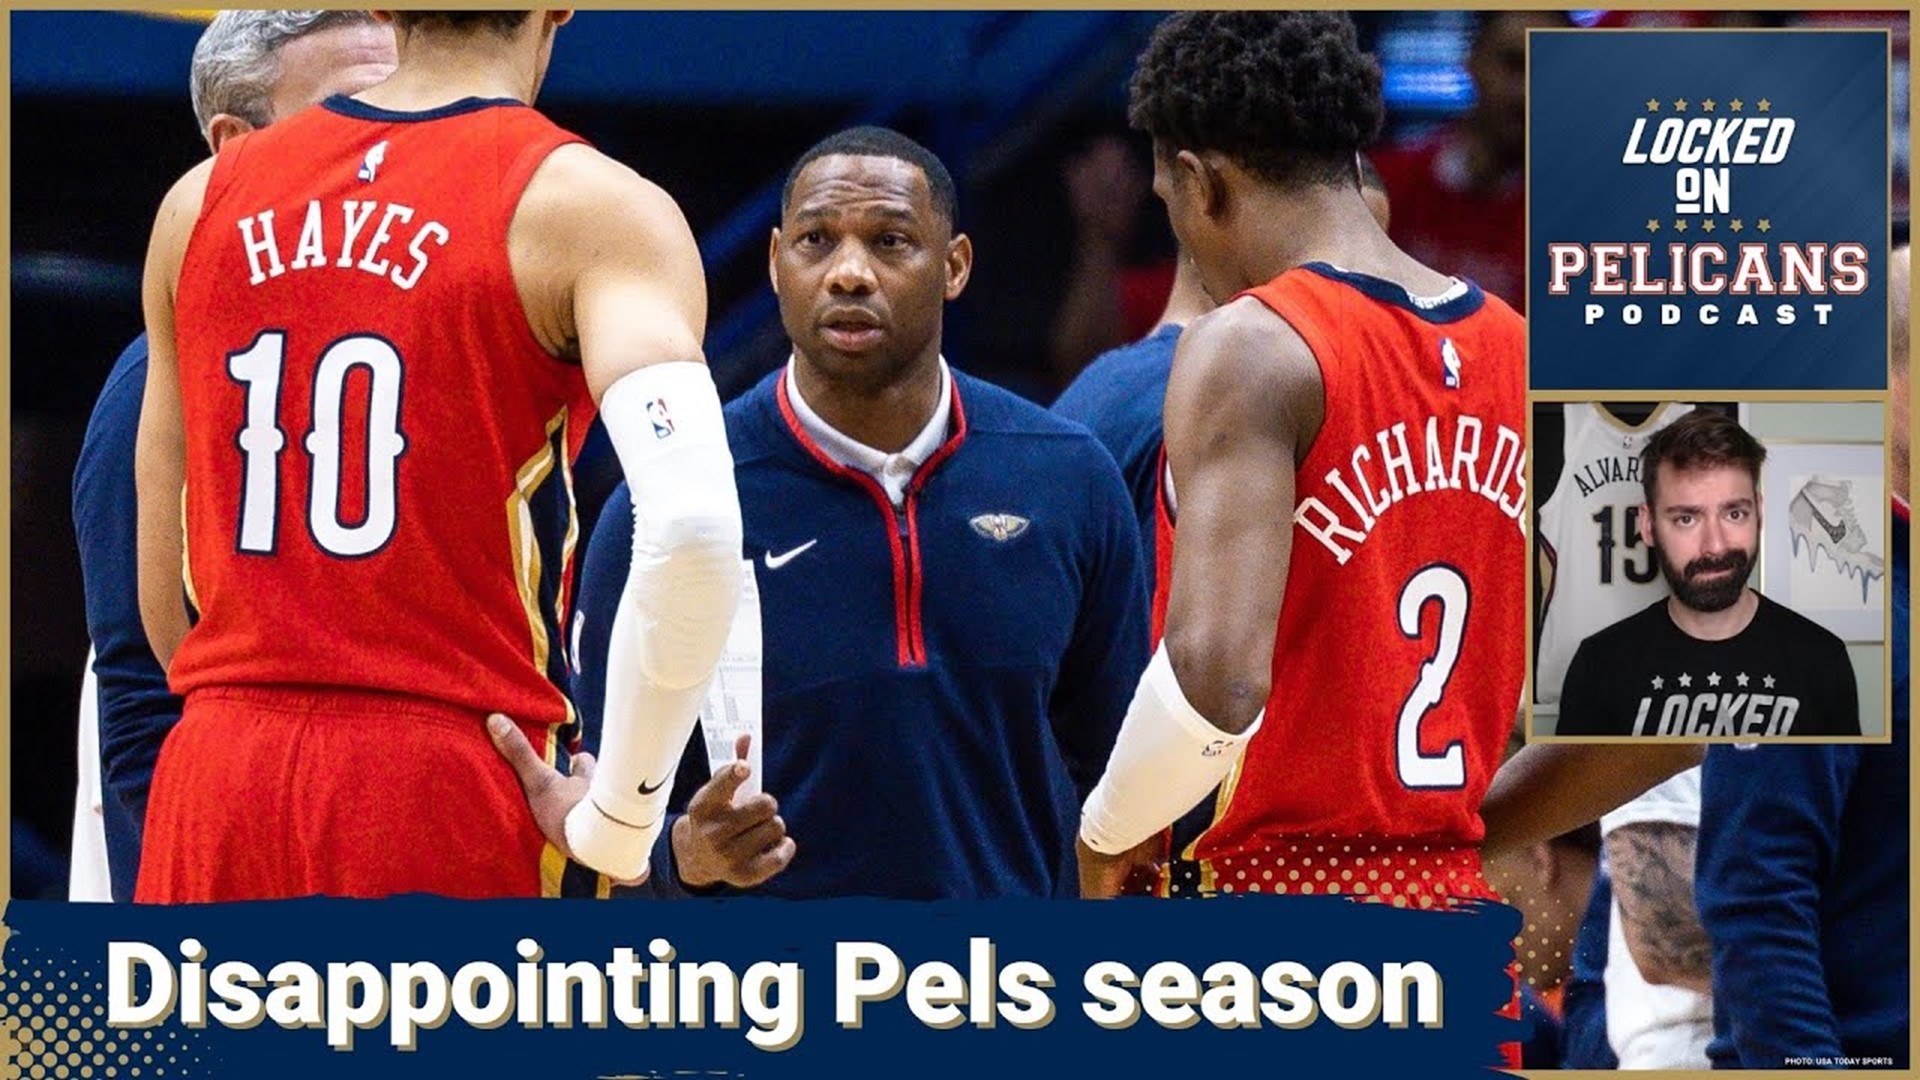 Now that the season is over for the New Orleans Pelicans and Zion Williamson, Jake Madison says it is safe to call the season a disappointment.